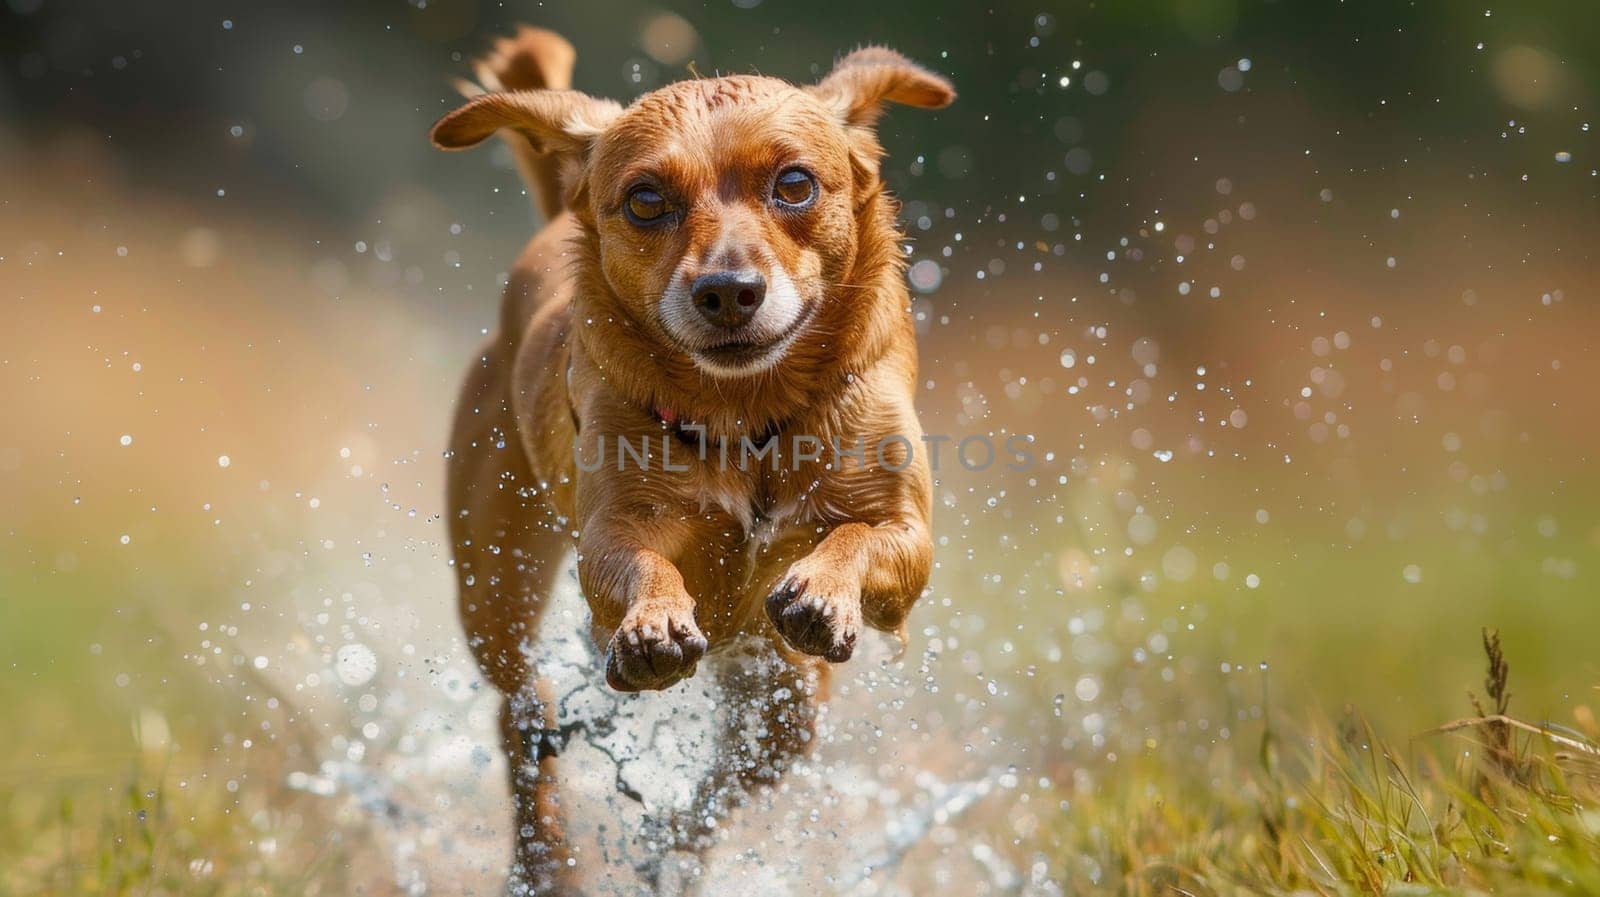 A brown dog running through a field of grass and water, AI by starush